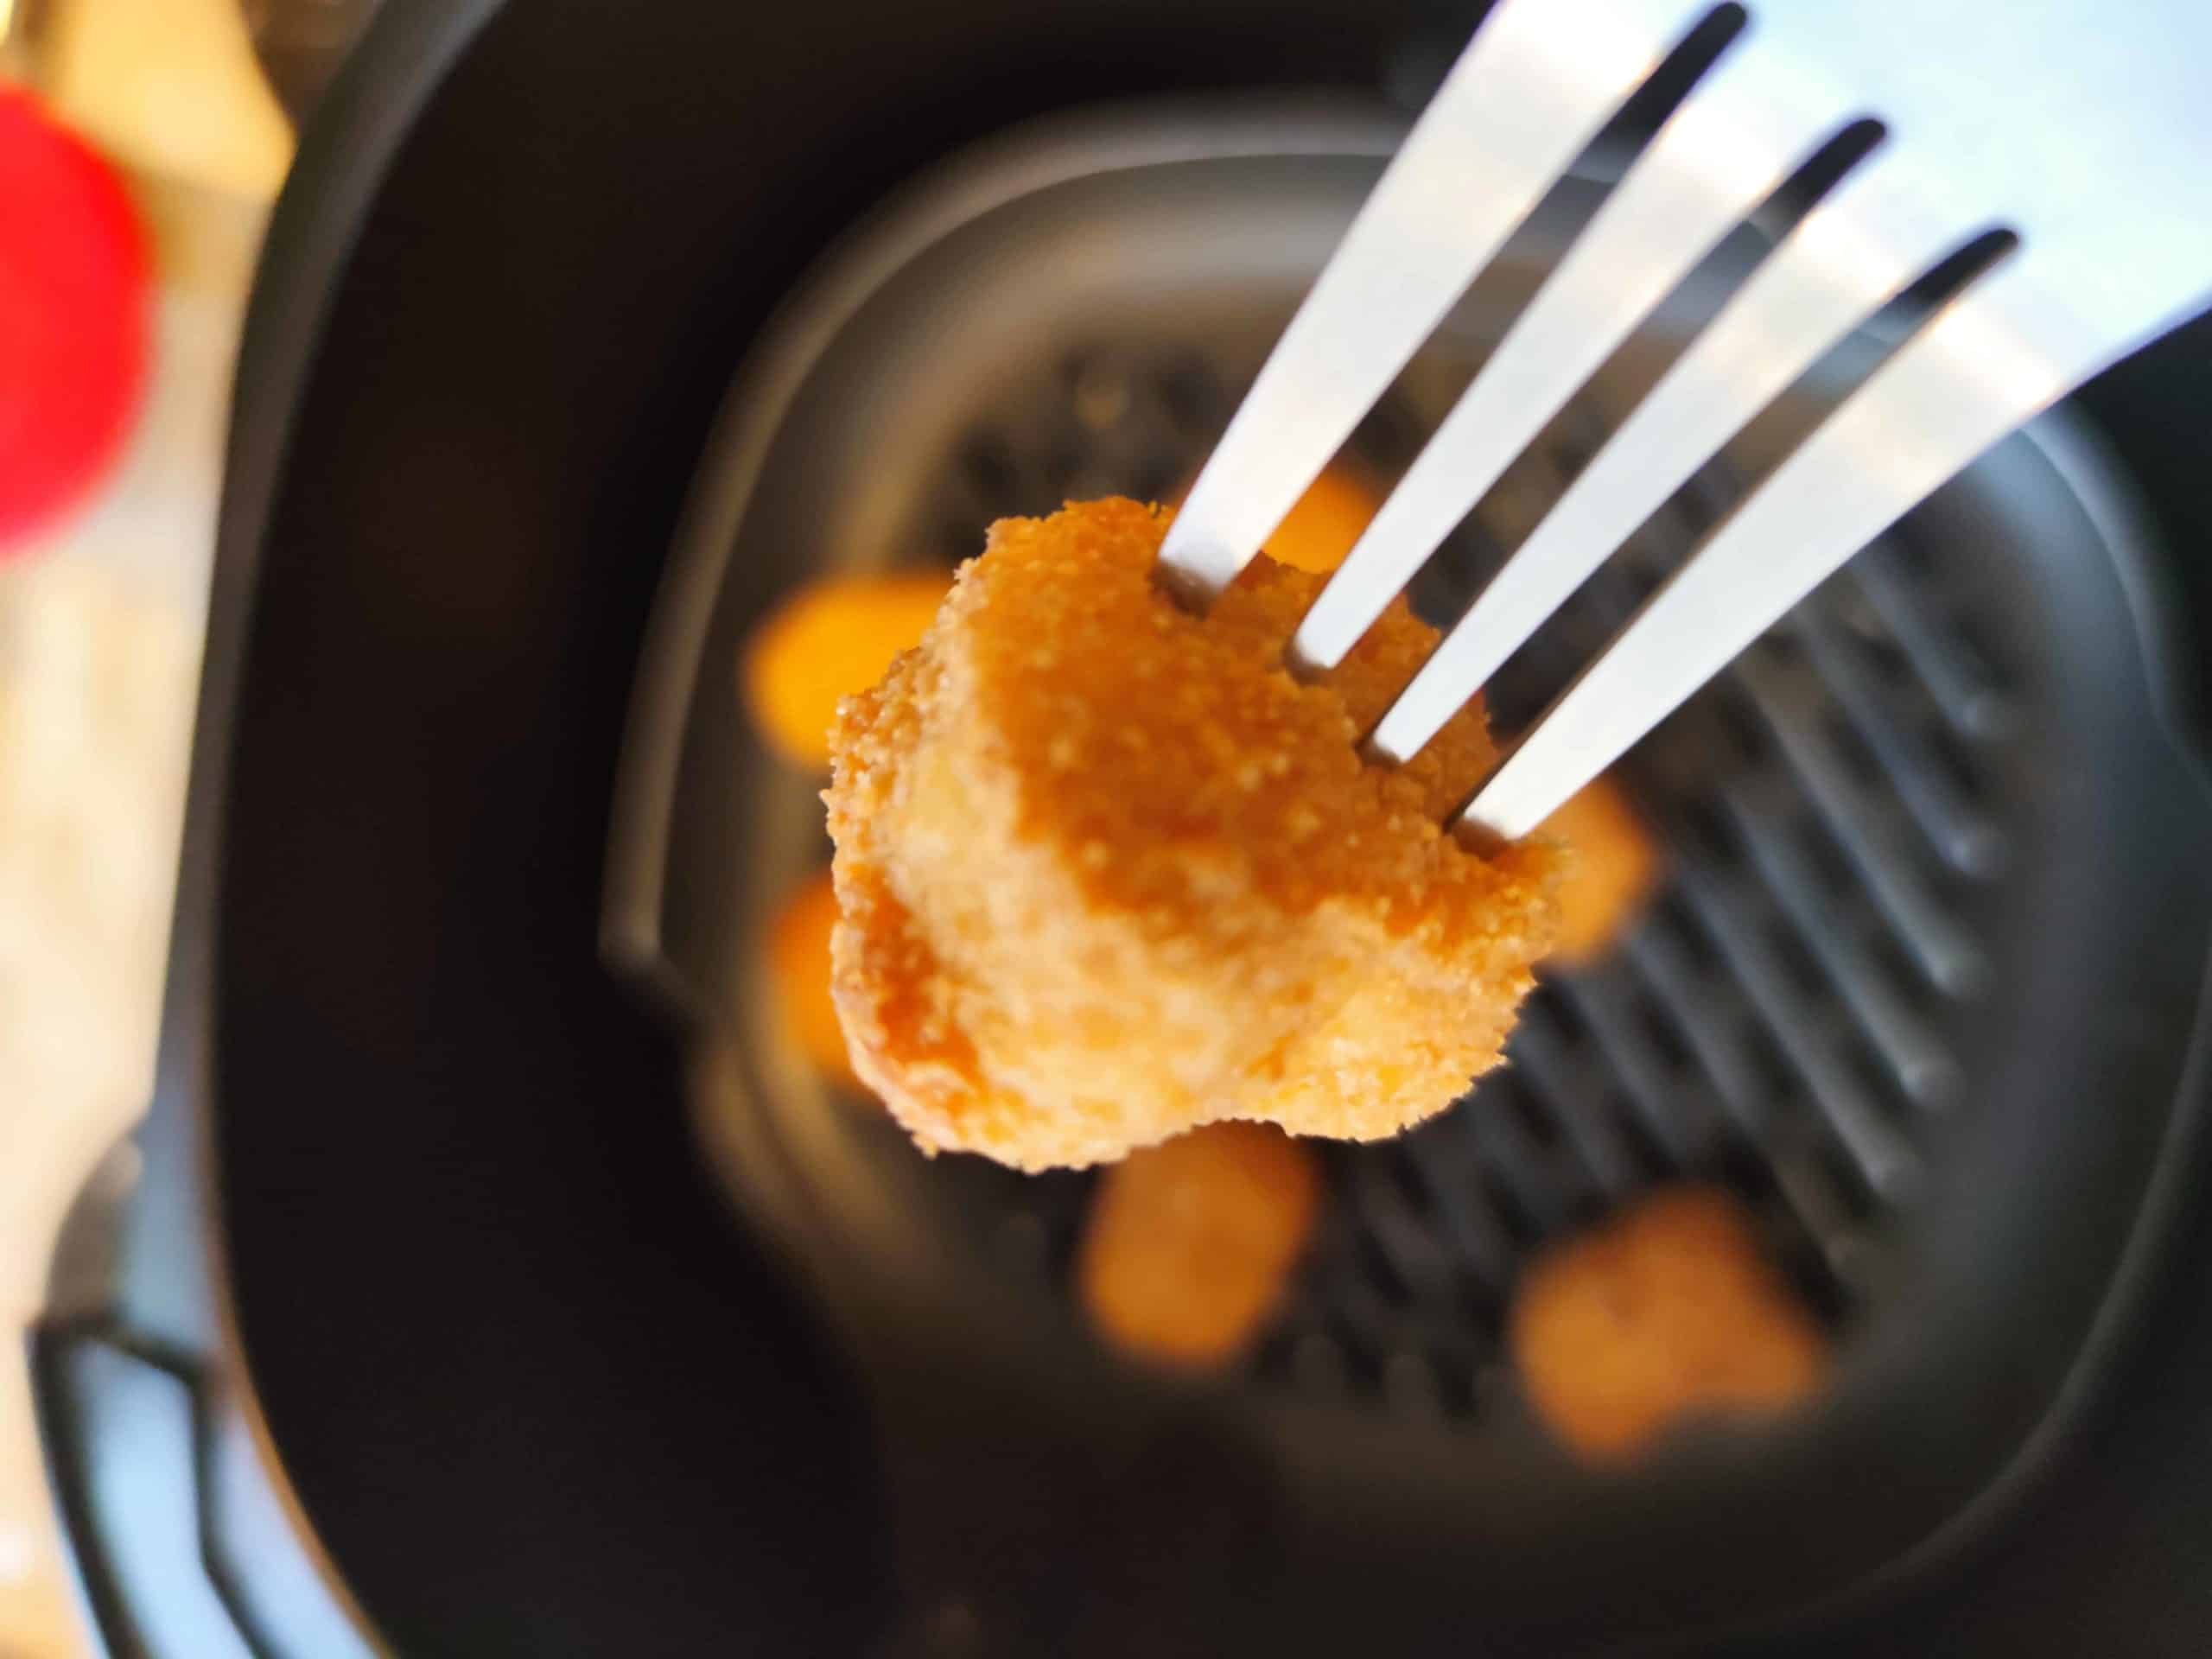 How To Air Fry Frozen Chicken Nuggets [So They Taste Great]